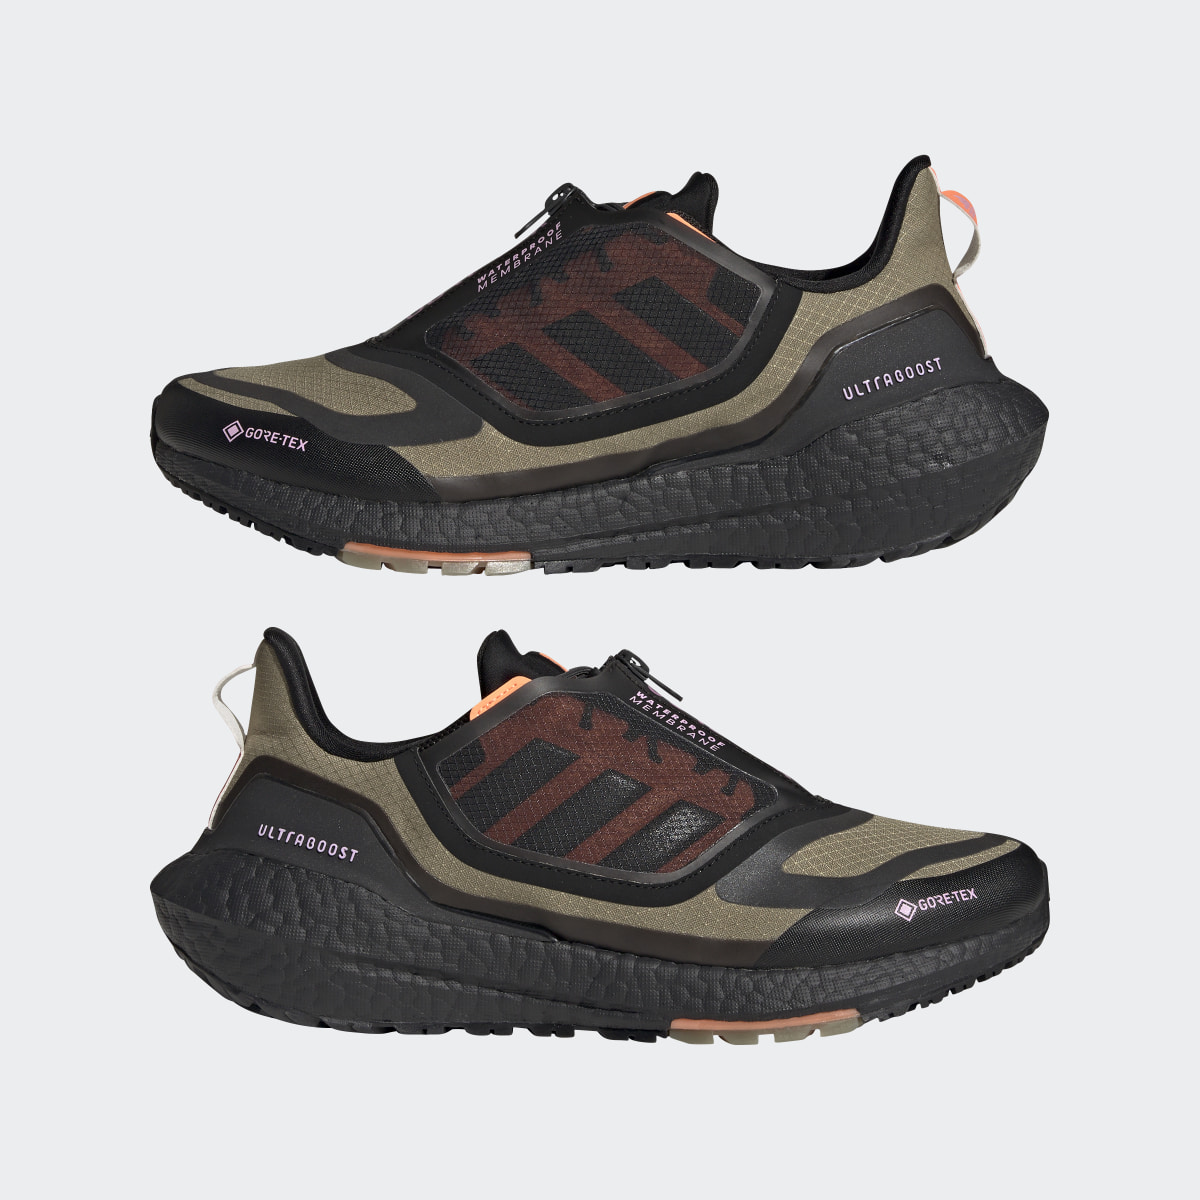 Adidas Ultraboost 22 GORE-TEX Shoes. 11